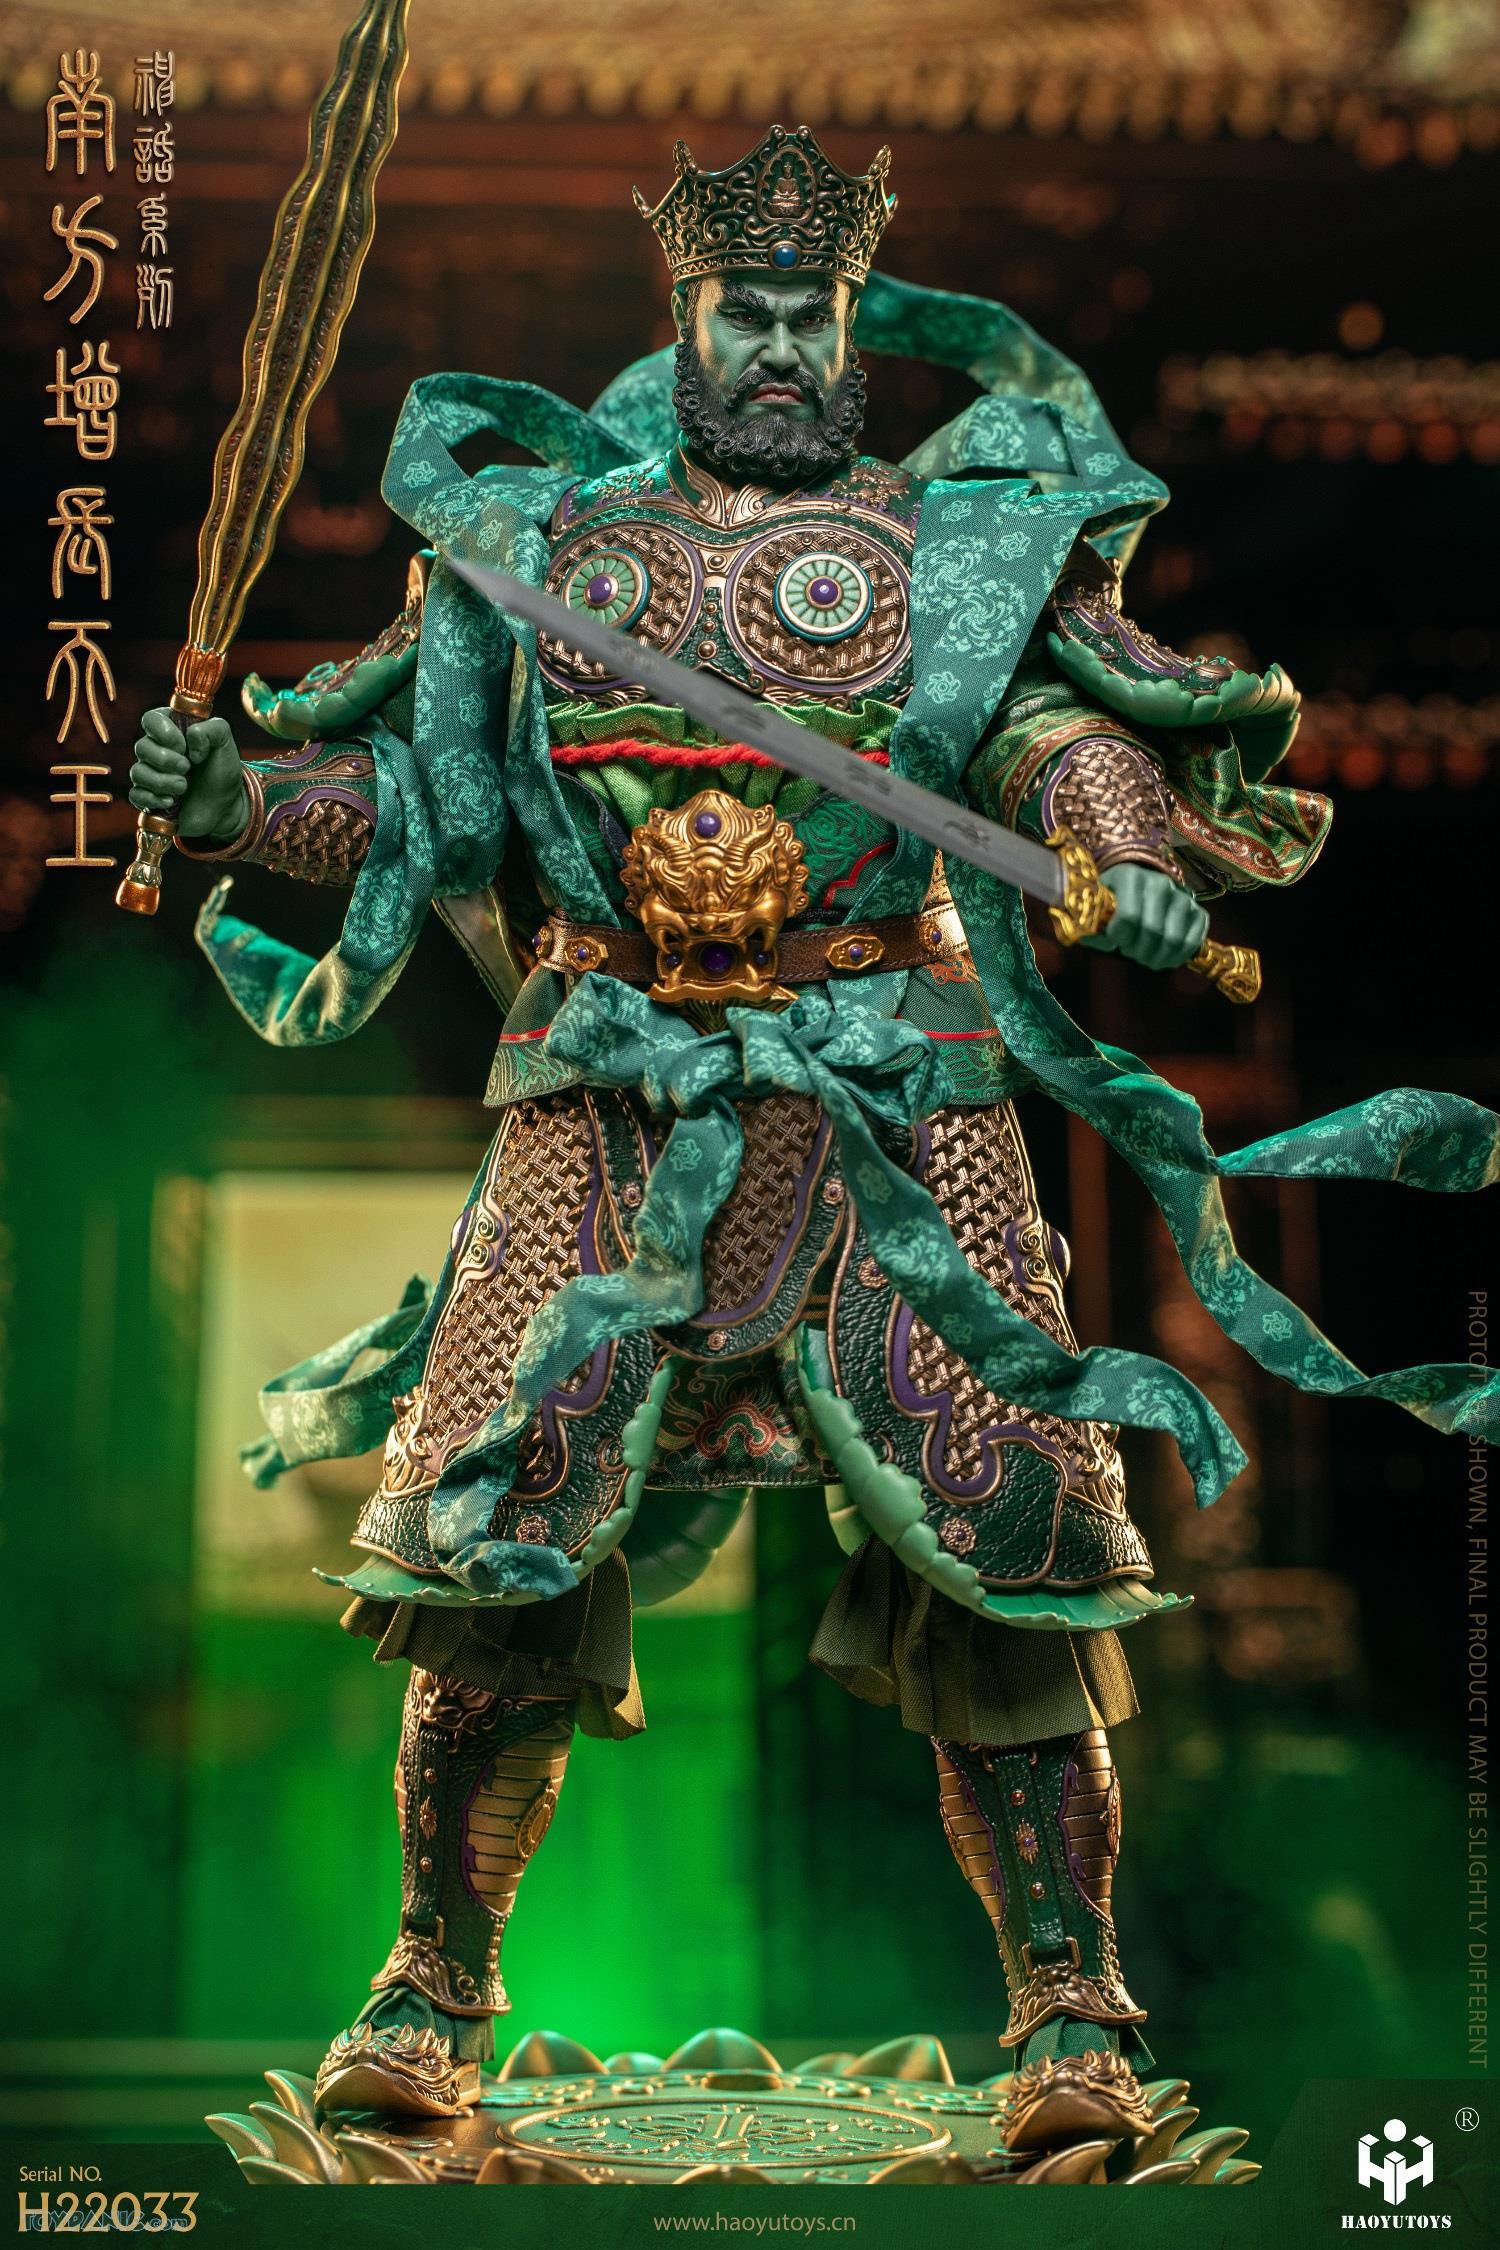 MythSeries - NEW PRODUCT: HaoYuToys 1/6 Myth Series Southern Growth King 212202451832PM_9902726